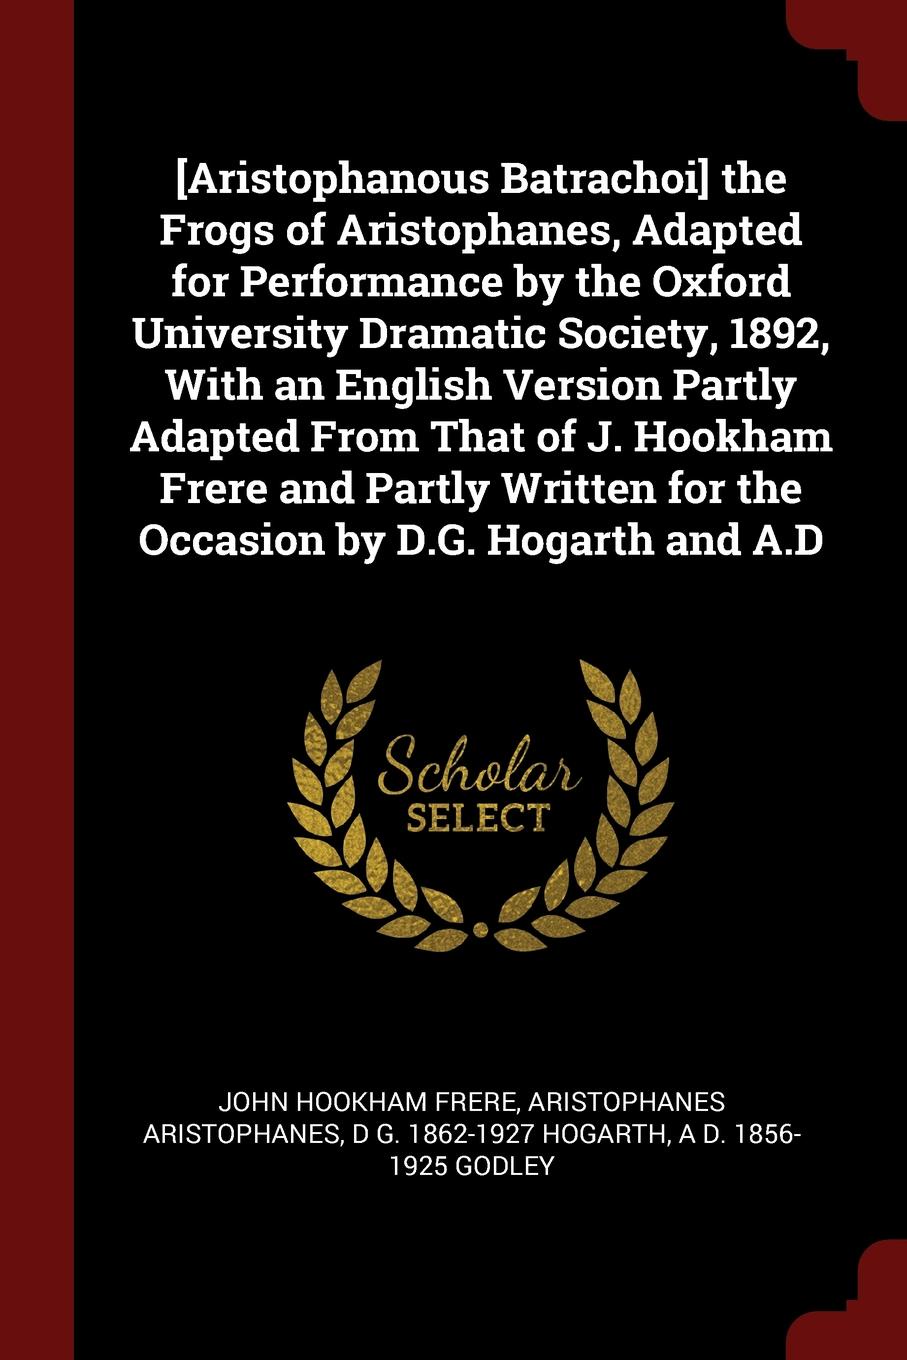 .Aristophanous Batrachoi. the Frogs of Aristophanes, Adapted for Performance by the Oxford University Dramatic Society, 1892, With an English Version Partly Adapted From That of J. Hookham Frere and Partly Written for the Occasion by D.G. Hogarth ...